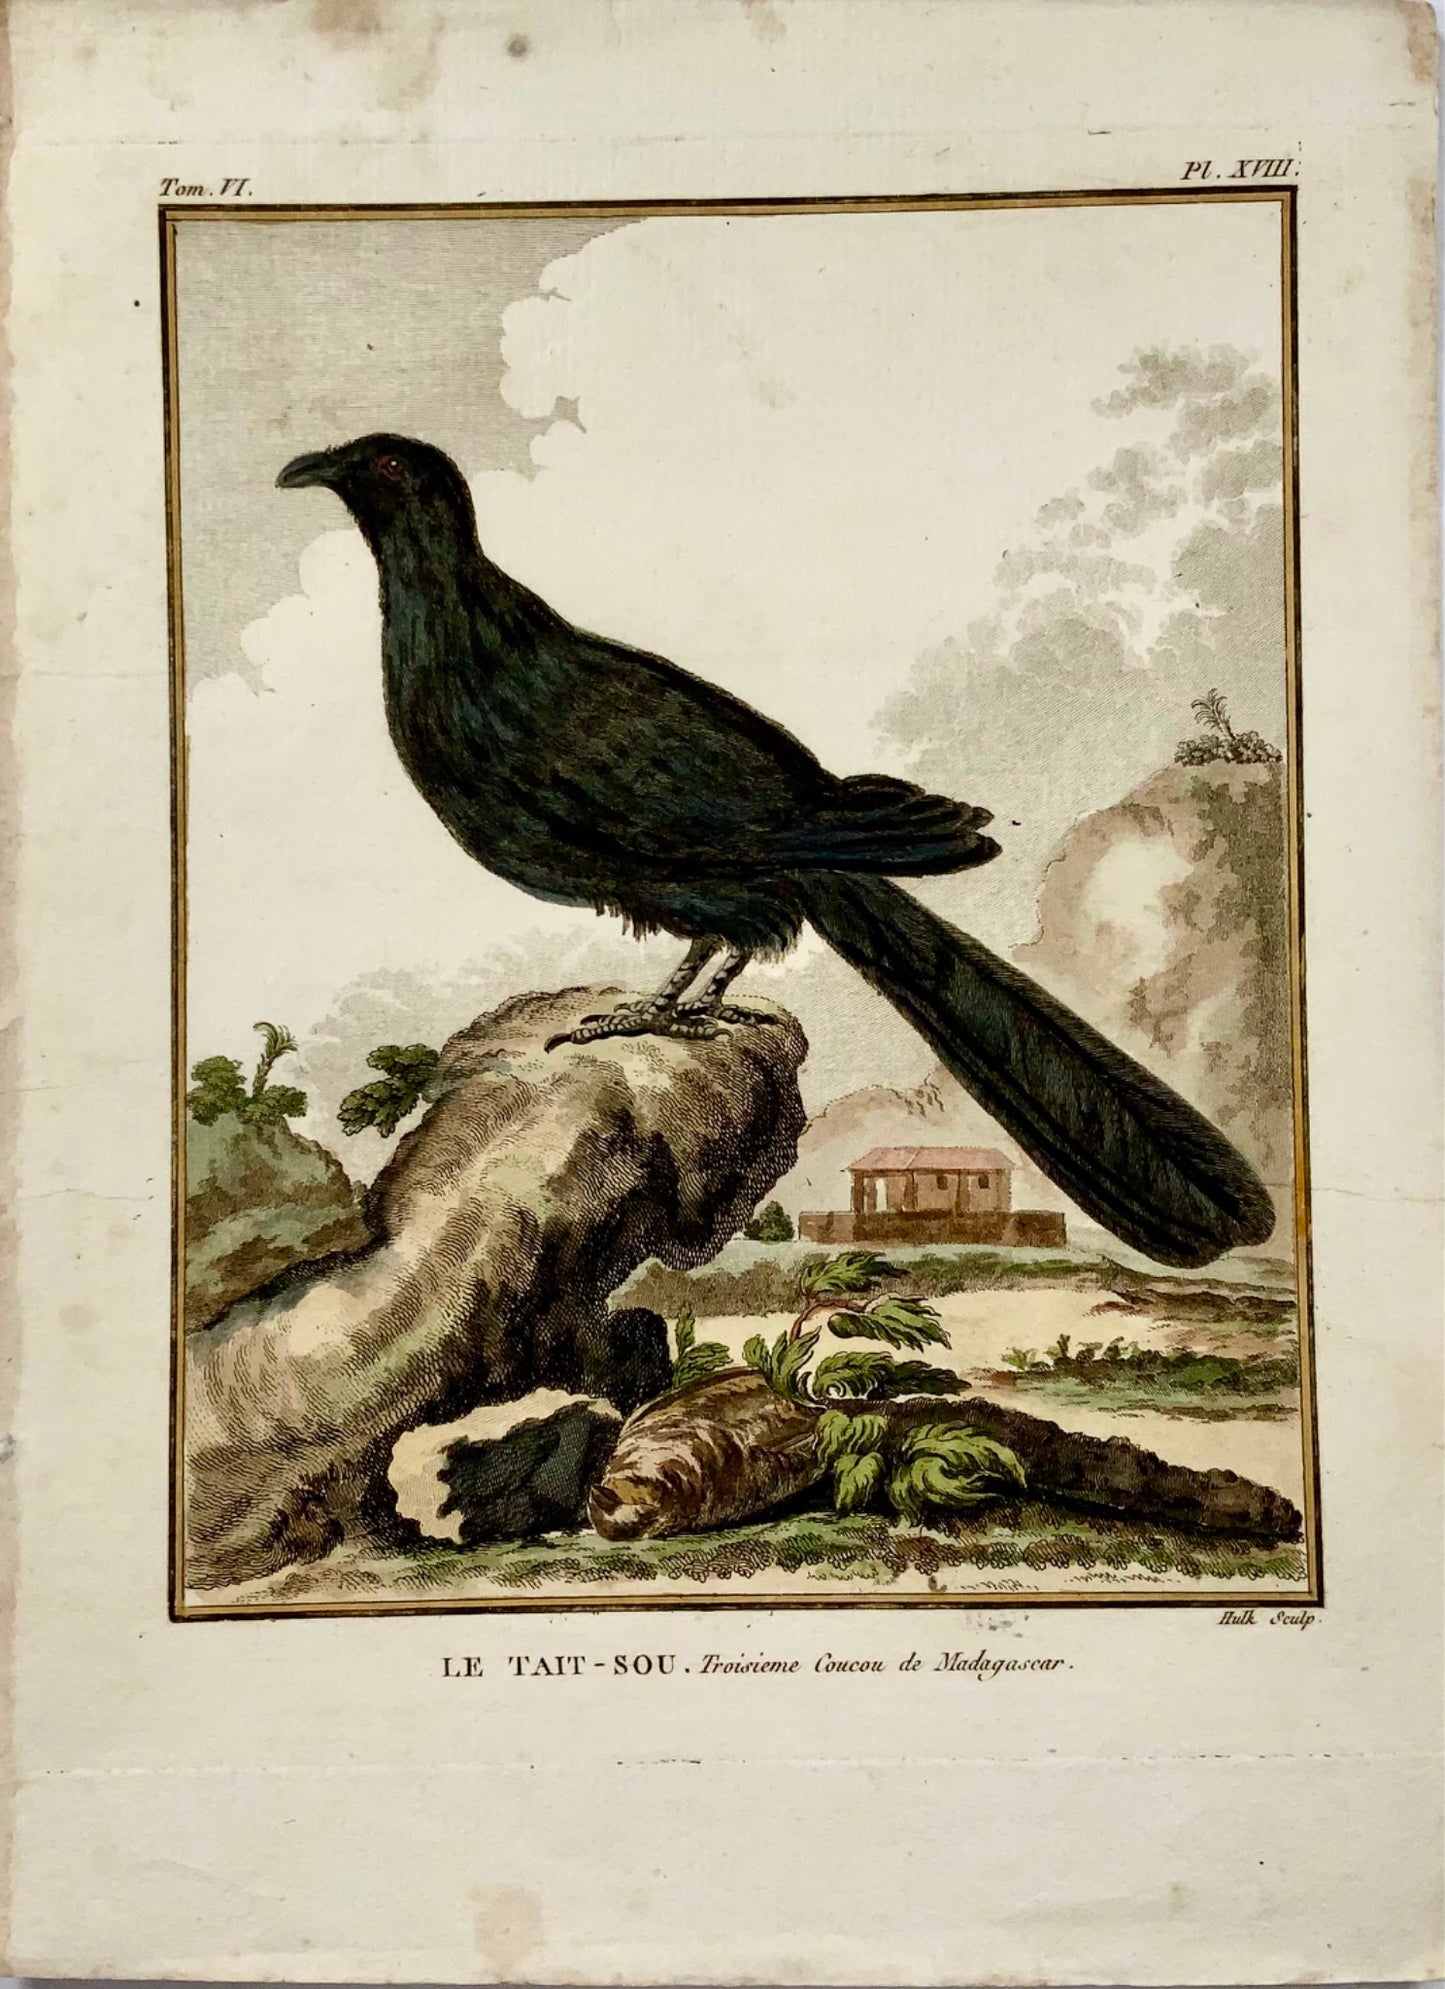 1779 Exotic Cuckoo, ornithology, 4to large edition, hand coloured engraving